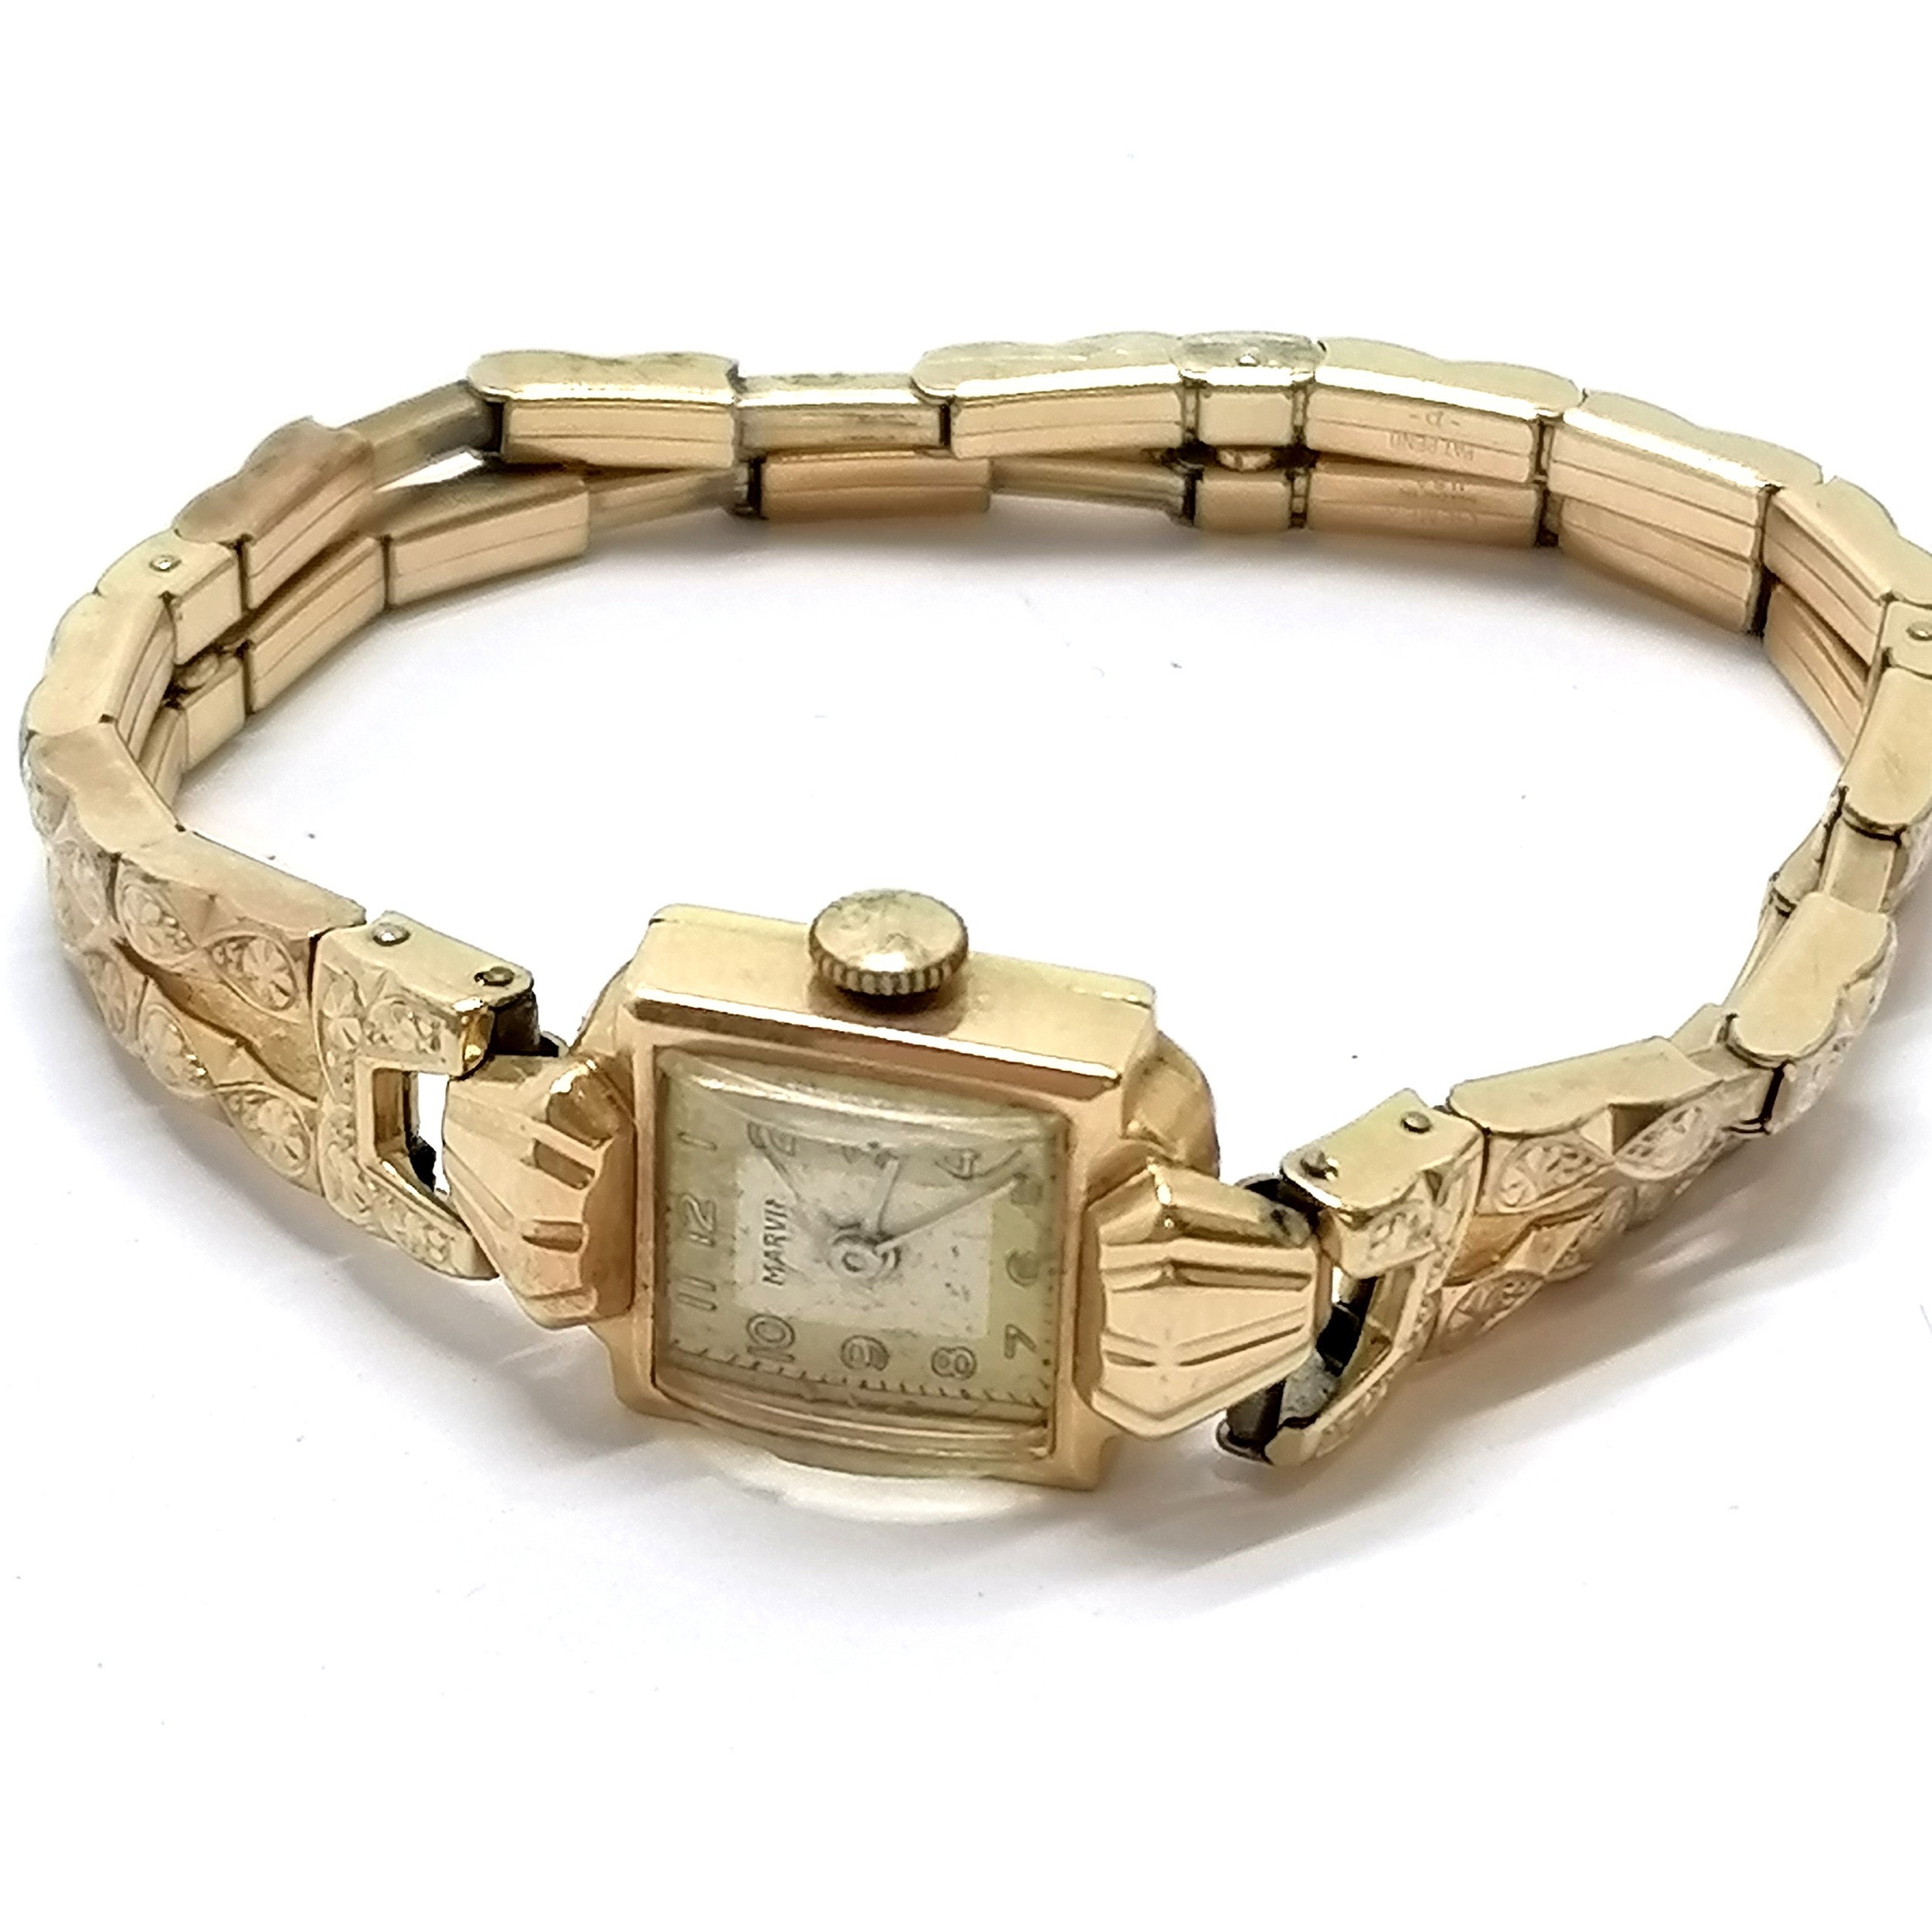 14ct gold cased Marvin Art Deco manual wind wristwatch (14mm across) on a non-gold stretchy bracelet